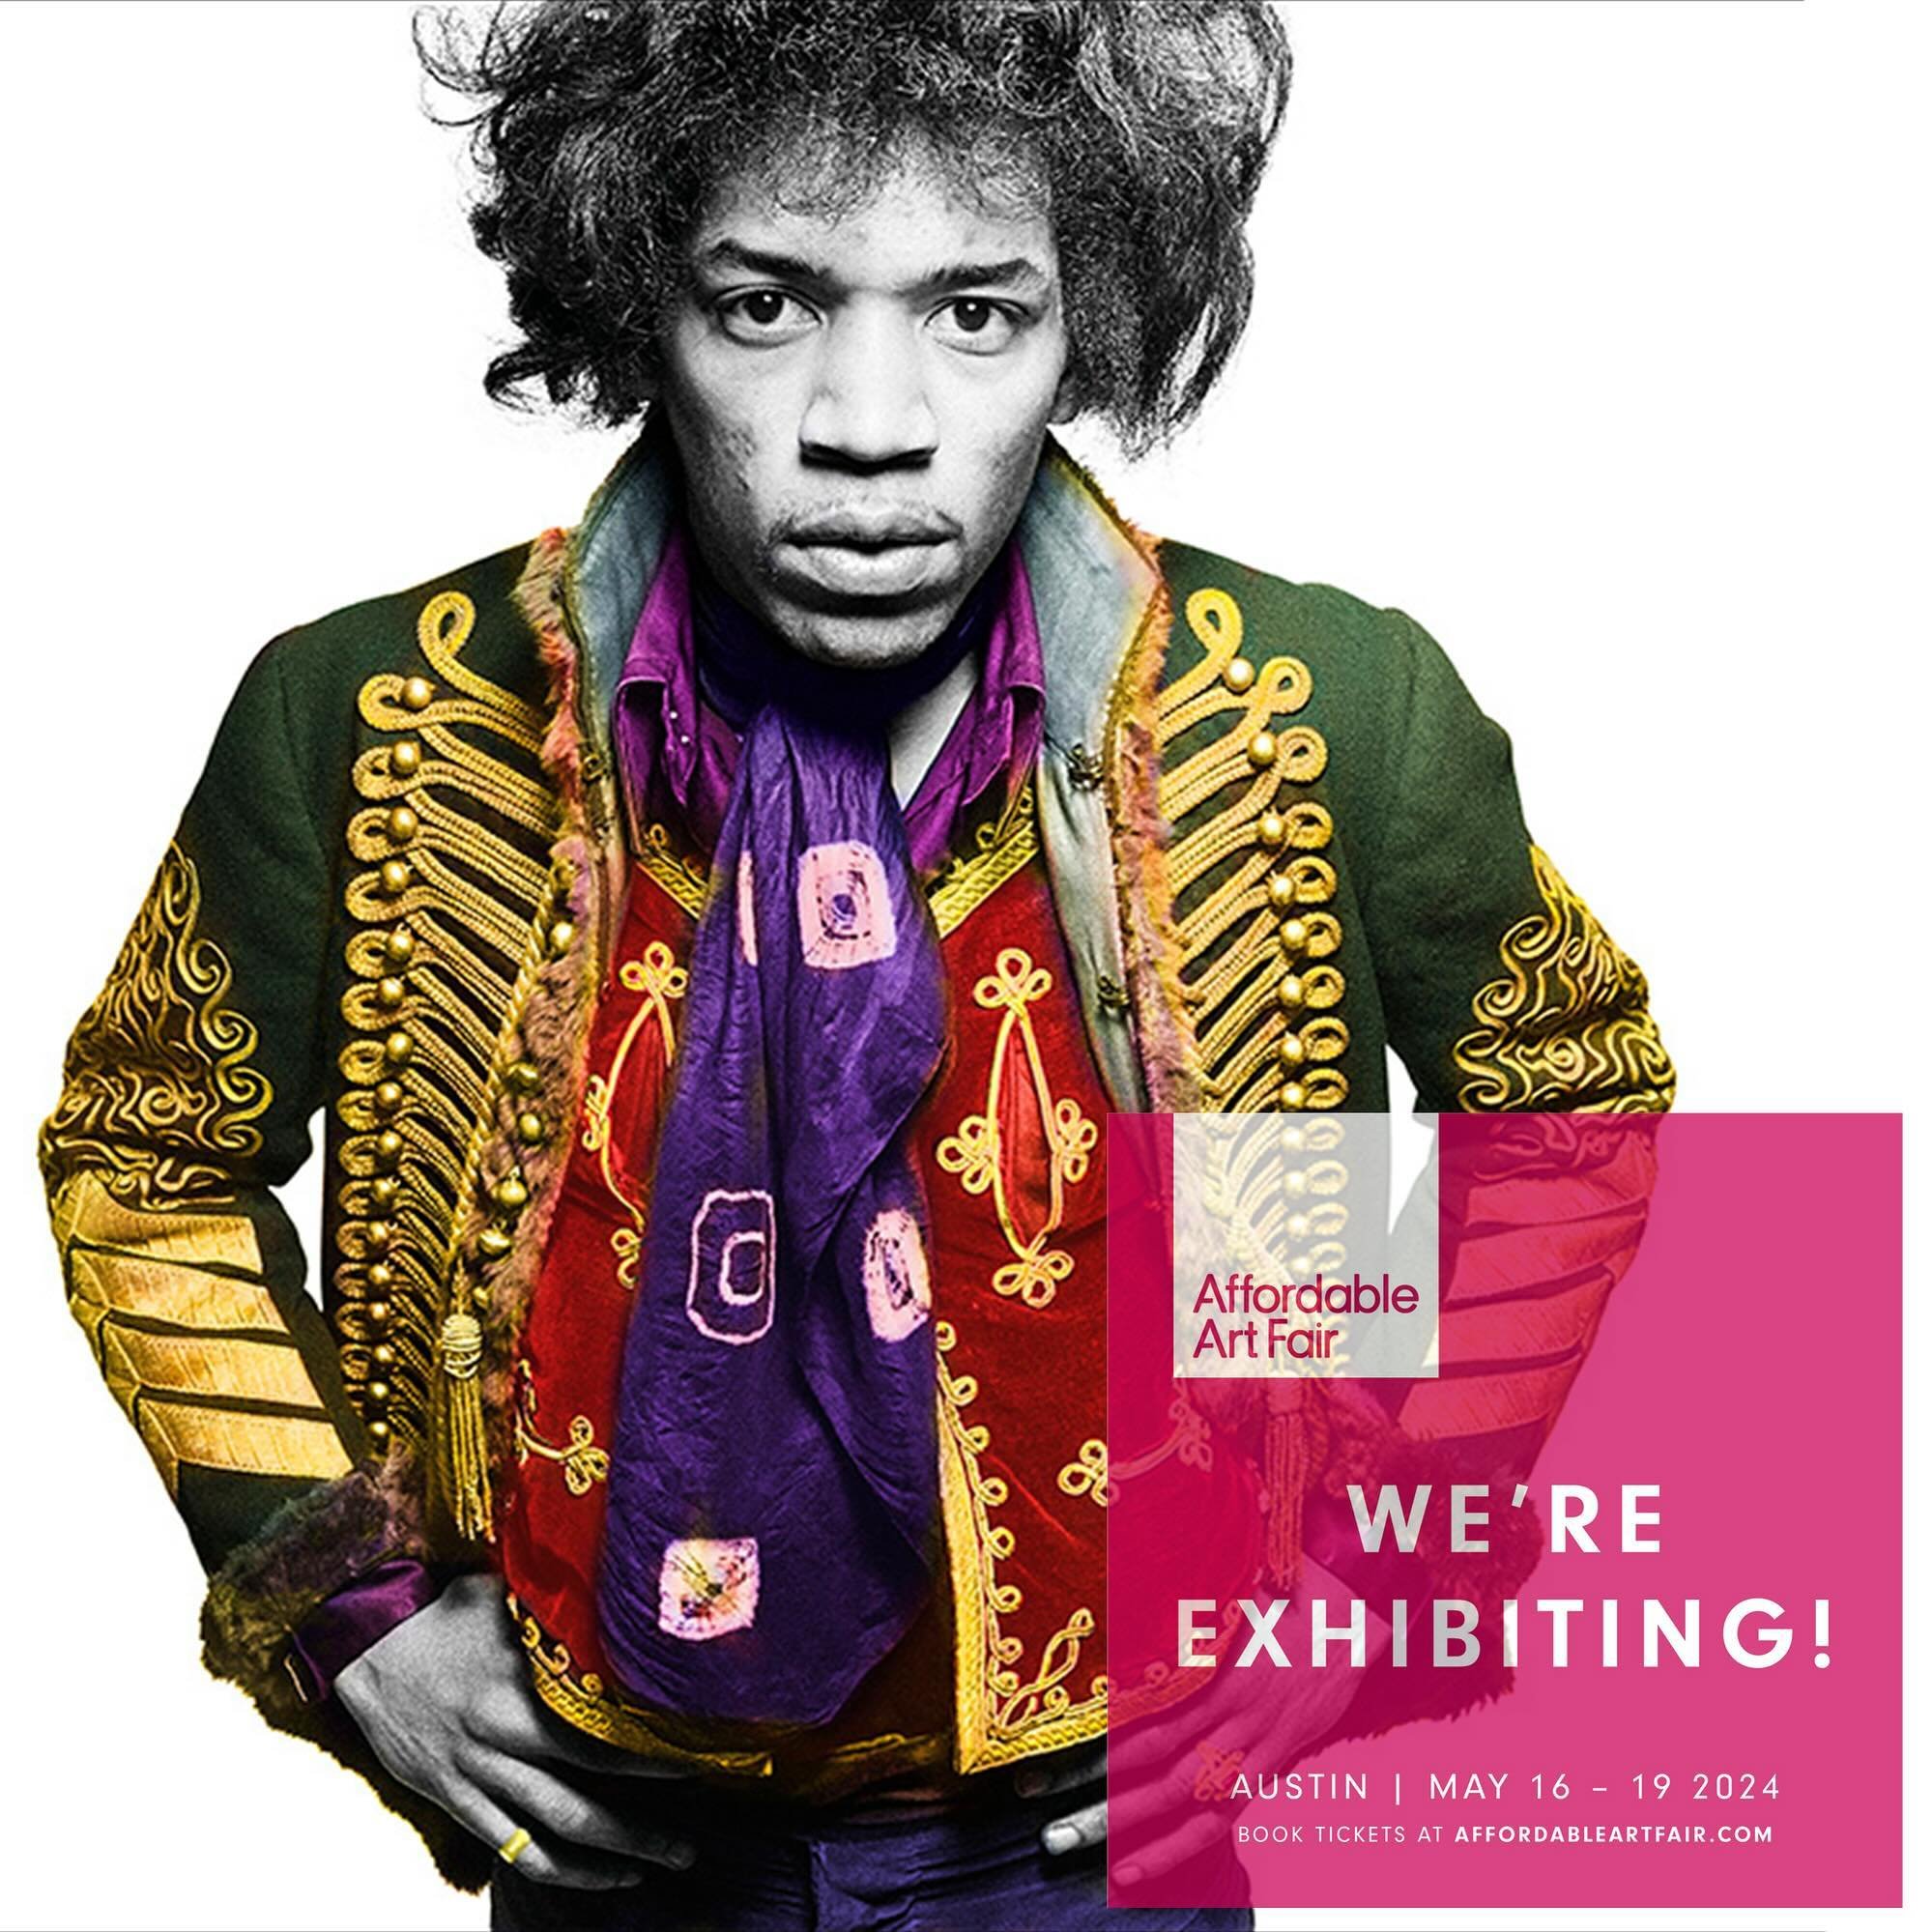 We&rsquo;ll be showcasing a stellar display of iconic rock photography on stand C10 at the Affordable Art Fair next week. This stunning Jimi Hendrix by Gered Mankowitz will be there, so be there or be square

#affordableartfair #modernrocksgallery #p